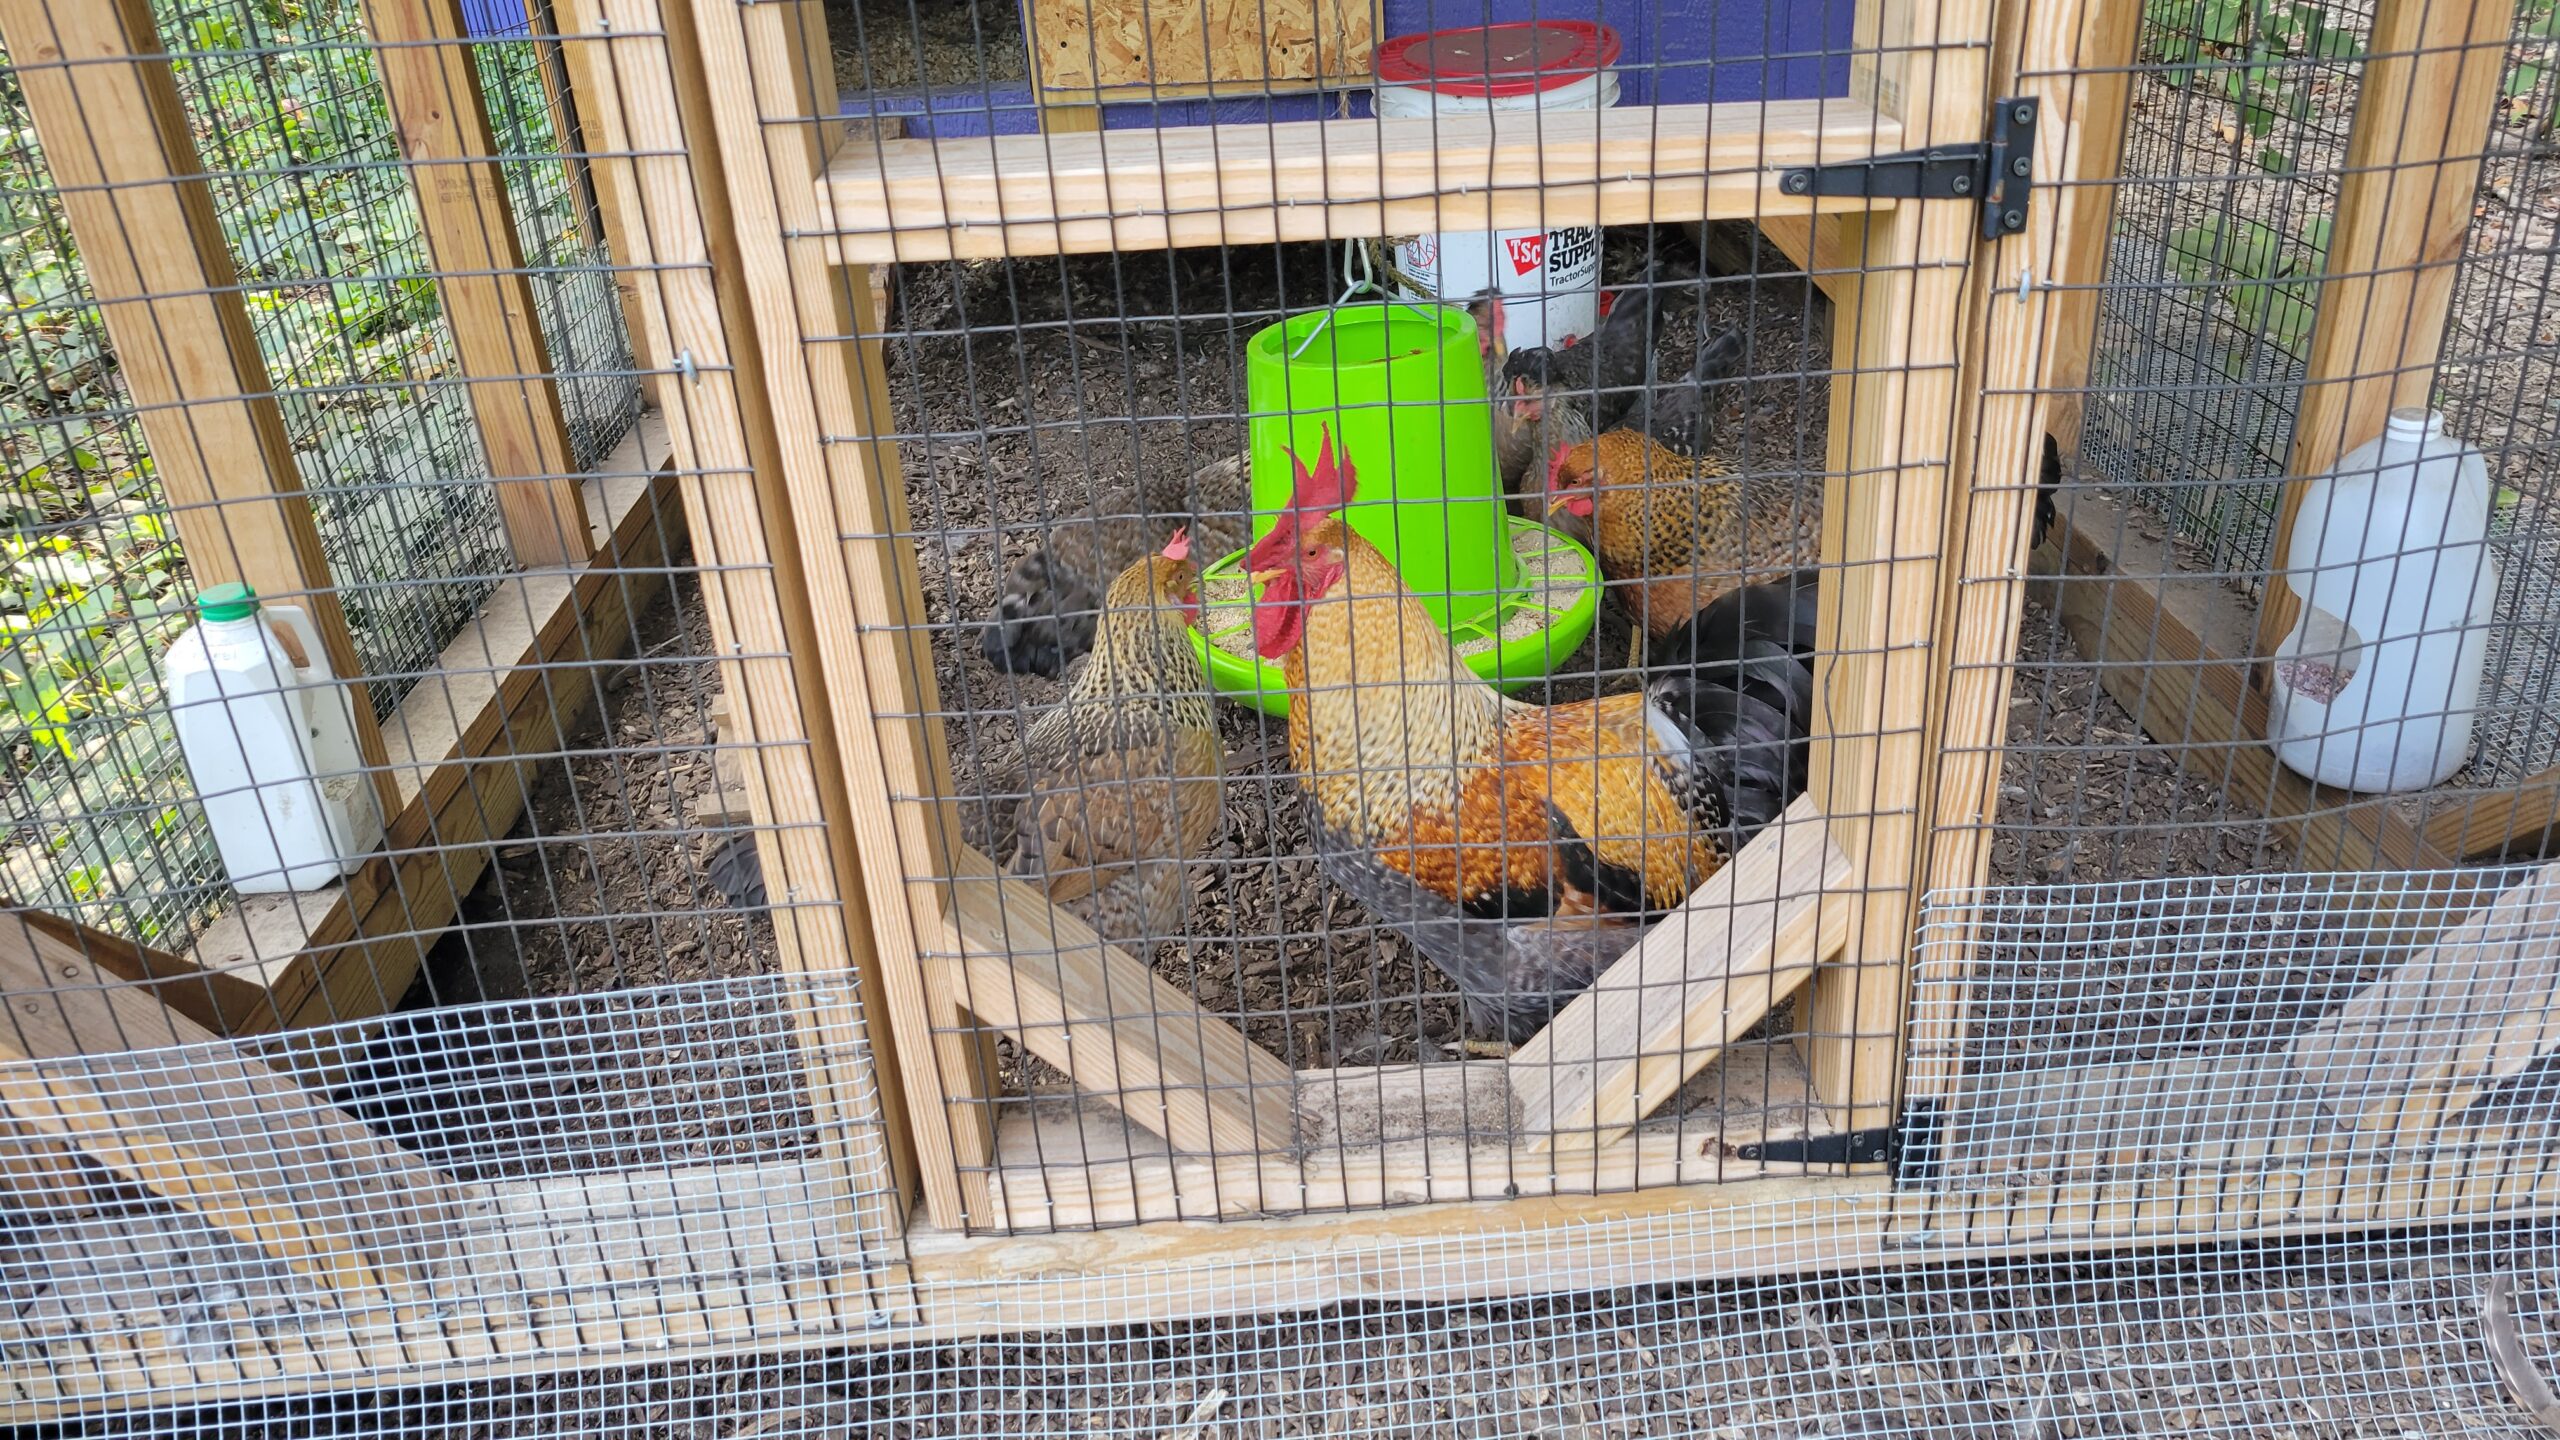 Photo of six chickens in a small outdoor run. The chickens are gathered around a green feeder suspended from a rope. Clockwise from top left: a Bielefelder hen, half-hidden behind the feeder; two Cream Legbar hens; a Bielefelder hen; an Olive Egger rooster; an Olive Egger hen.